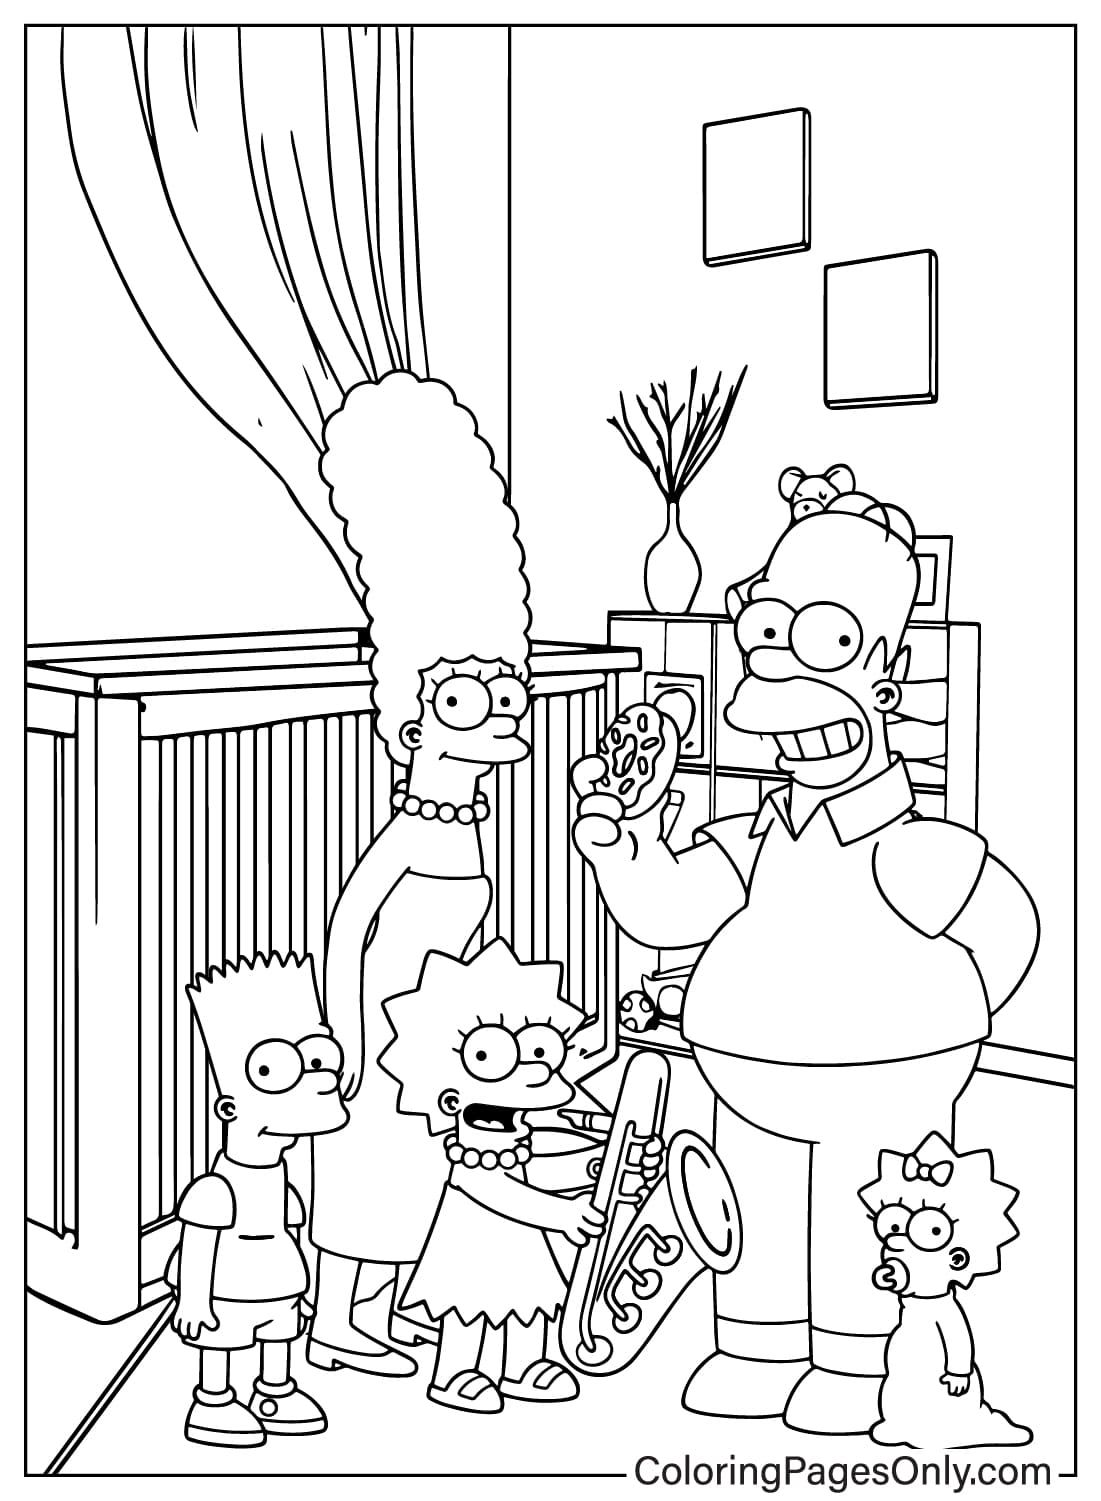 Simpsons Coloring Page Free Printable